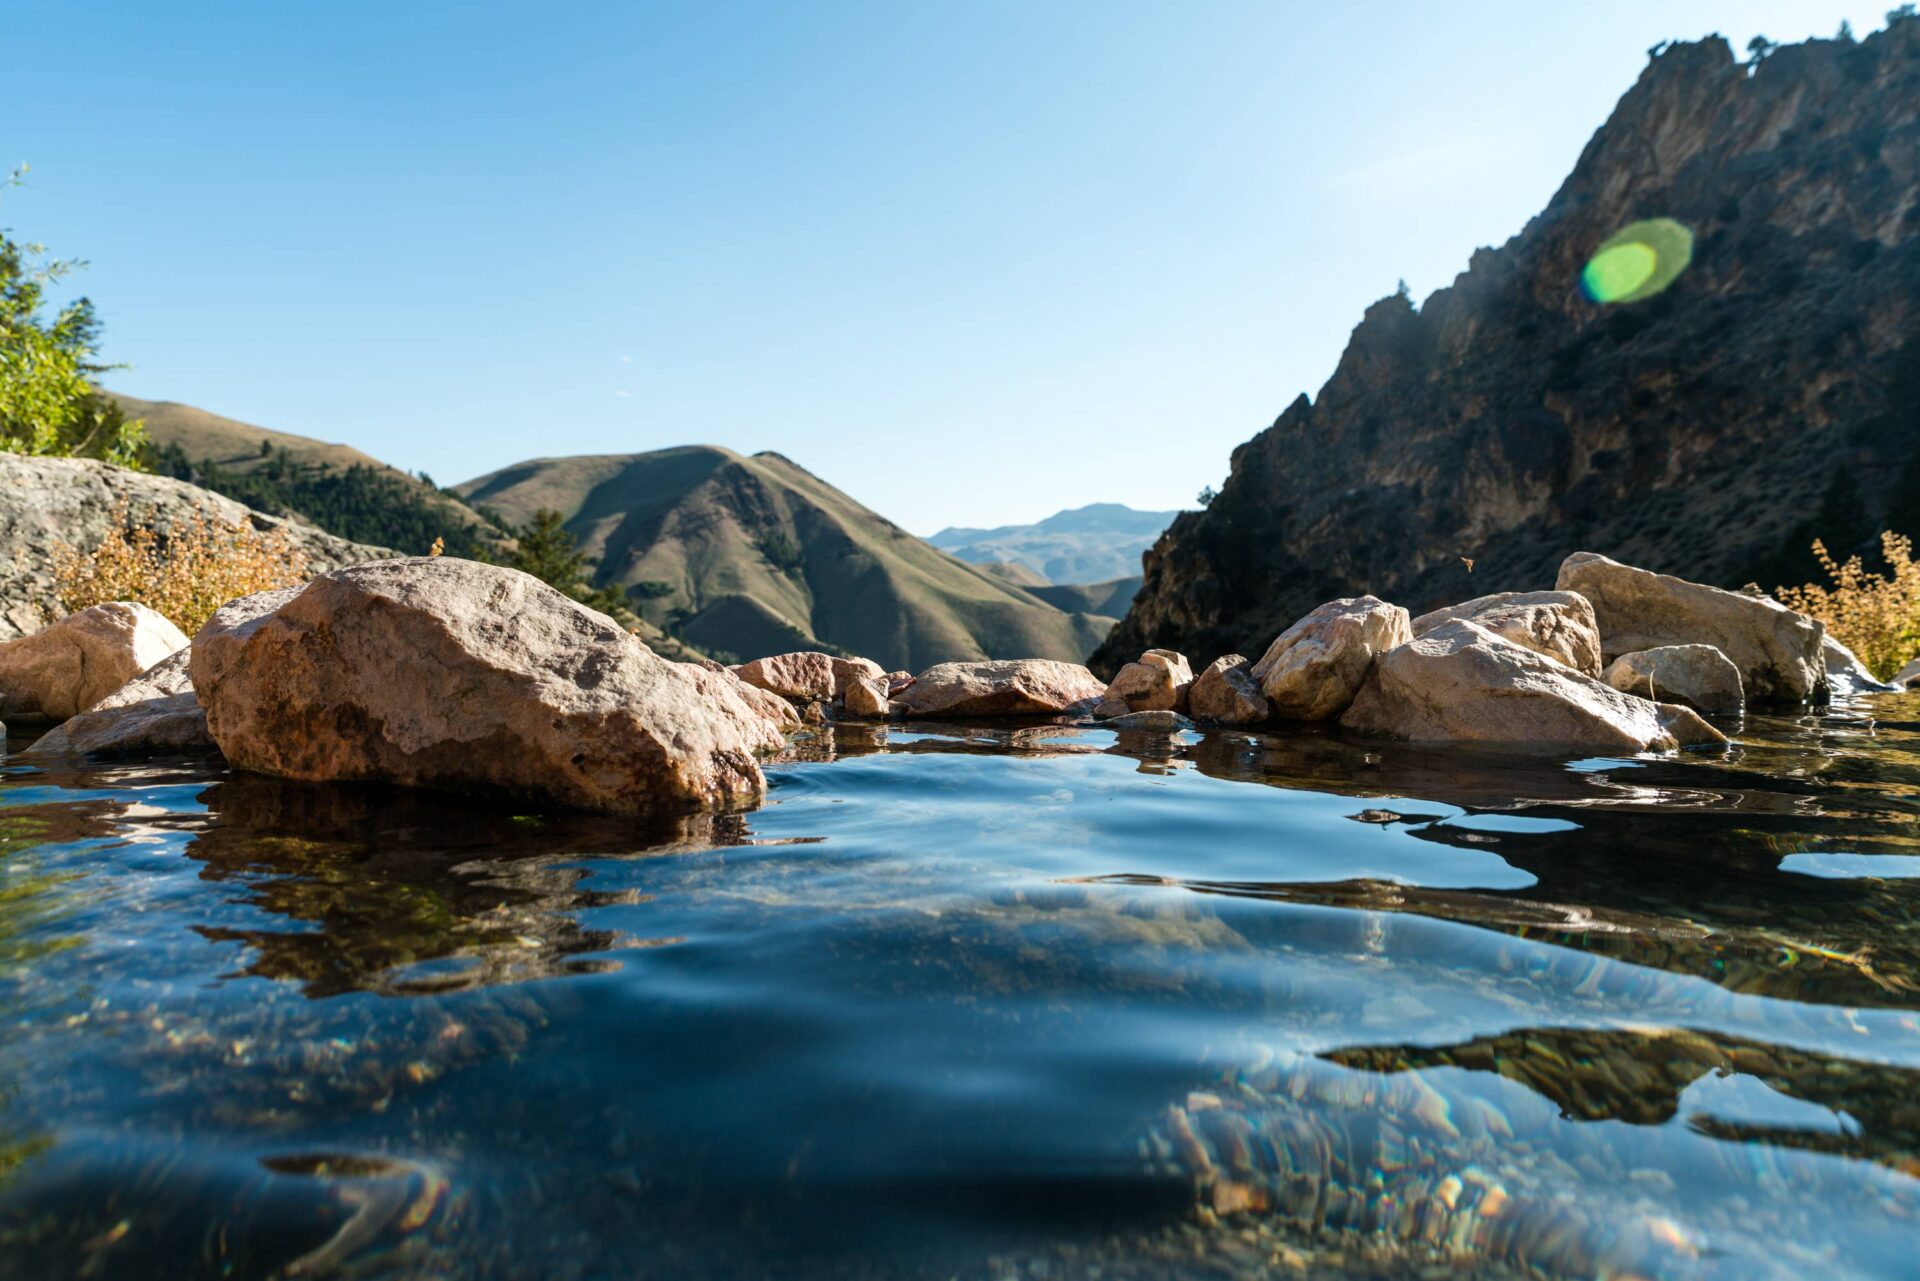 Visiting Goldbug hot springs is one of the most rewarding things to do in Salmon, Idaho. 